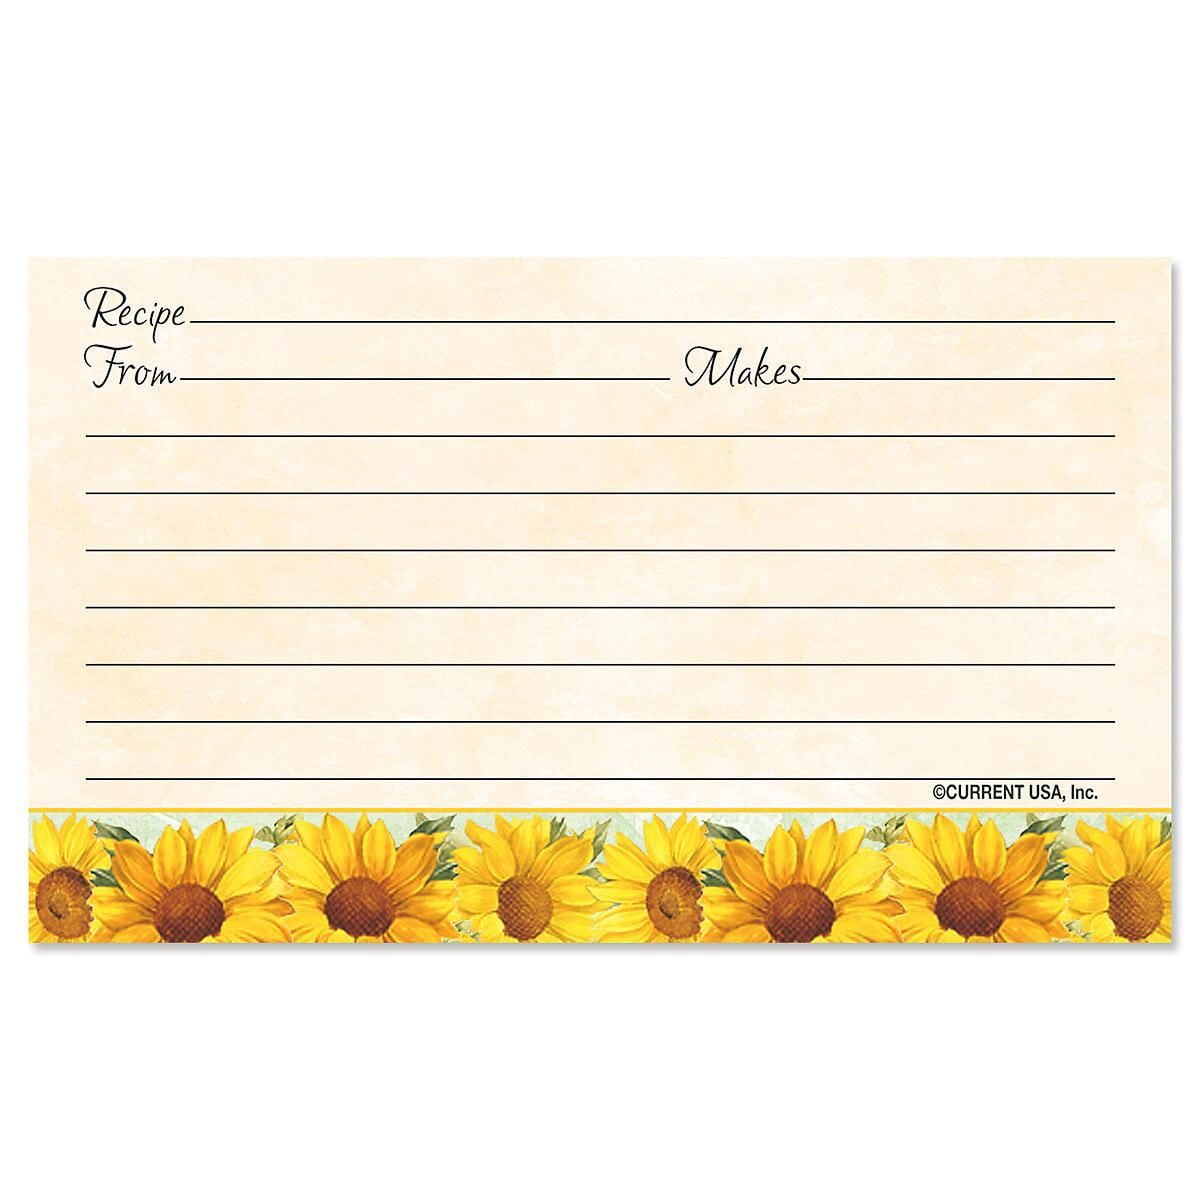 Neando 3 x 5 inches Index Card Dividers with Floral Pattern, The Blank  Index Cards Guide, 1/4 Cut Tabbed Note Cards, File and Recipe Guides,  400gsm